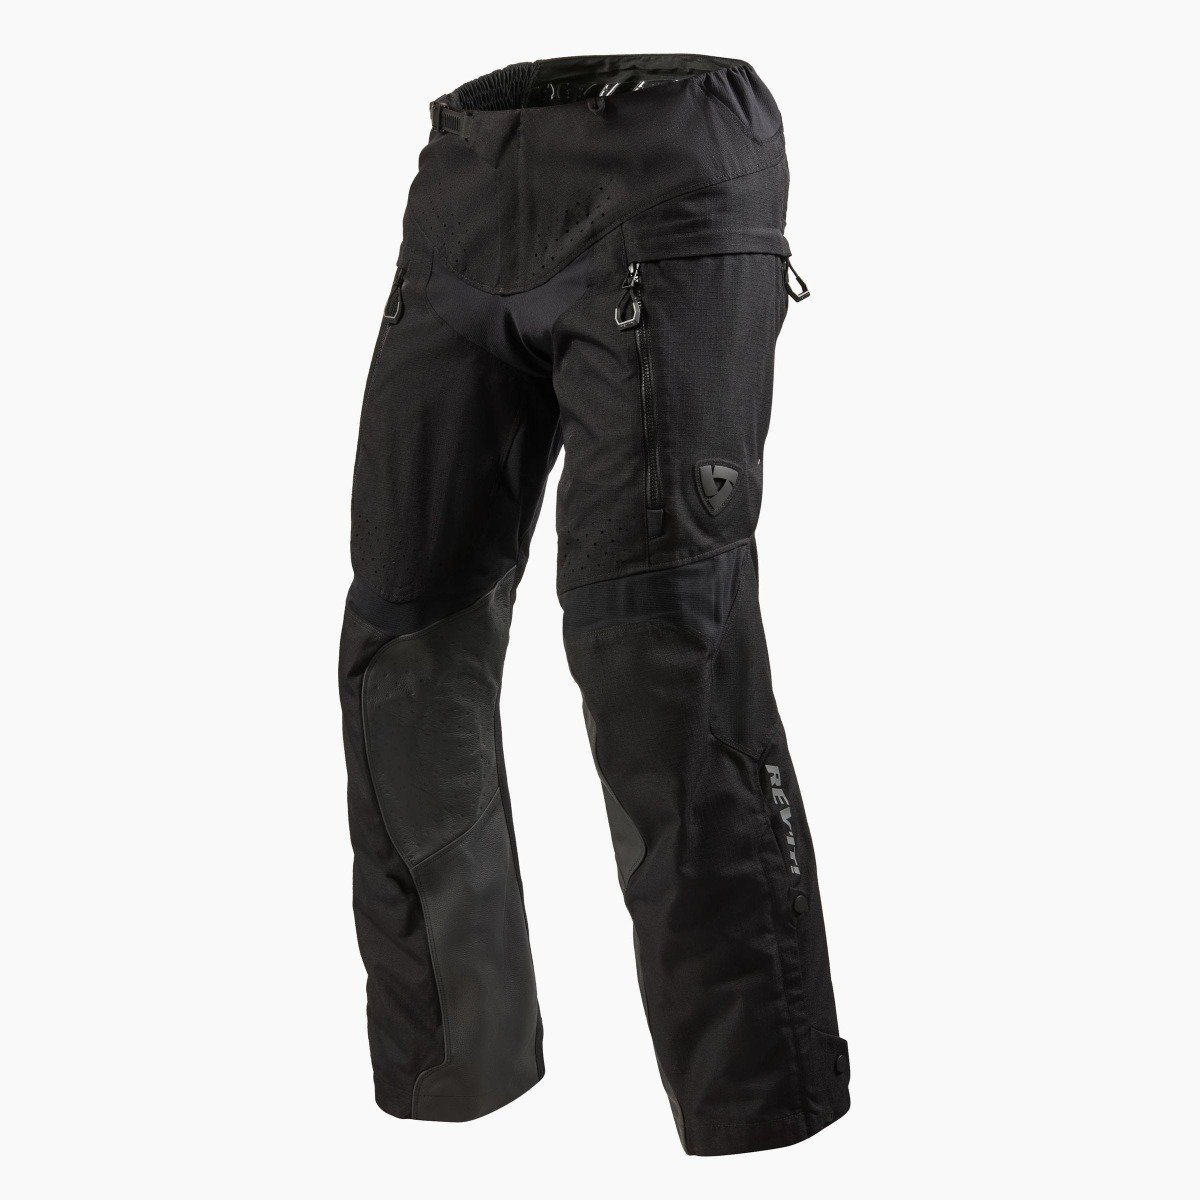 Image of REV'IT! Continent Short Black Motorcycle Pants Size L ID 8700001297097